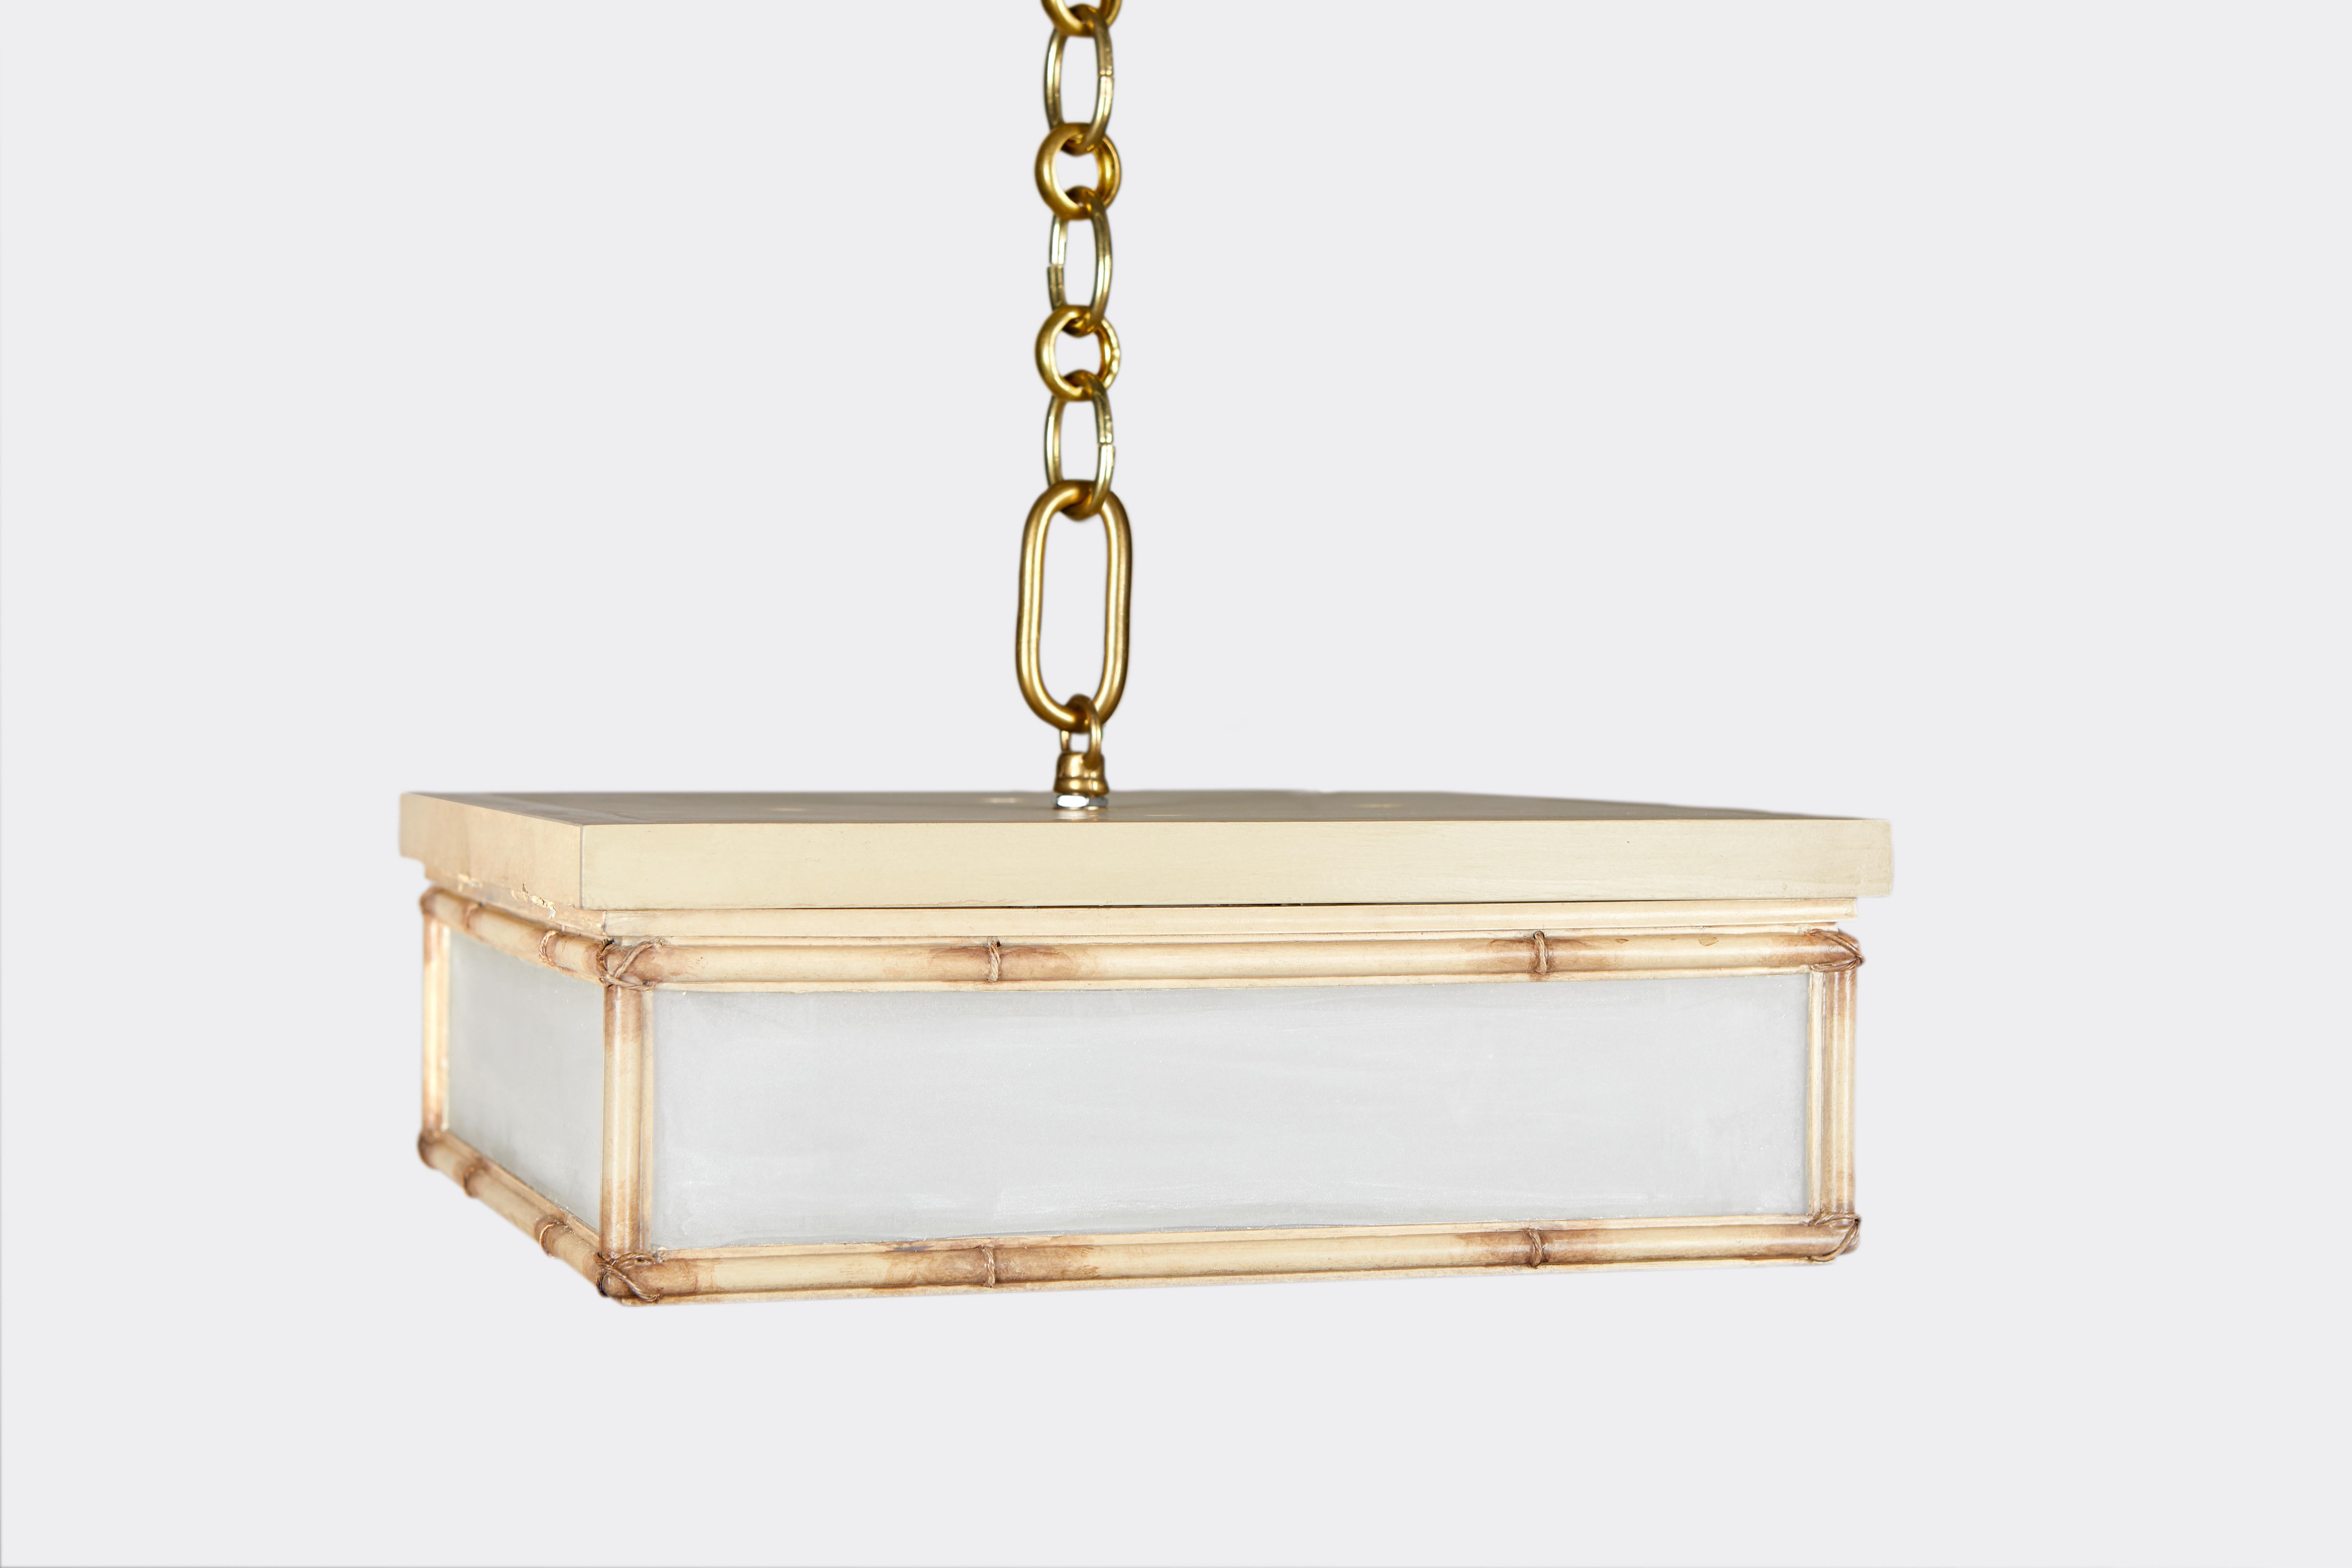 A square, flush mount light fixture designed by David Duncan. This exquisite flush mount fixture showcases hand painted, gold bamboo details on a painted frame. Each handcrafted fixture comes with the option of frosted glass or clear glass panels,